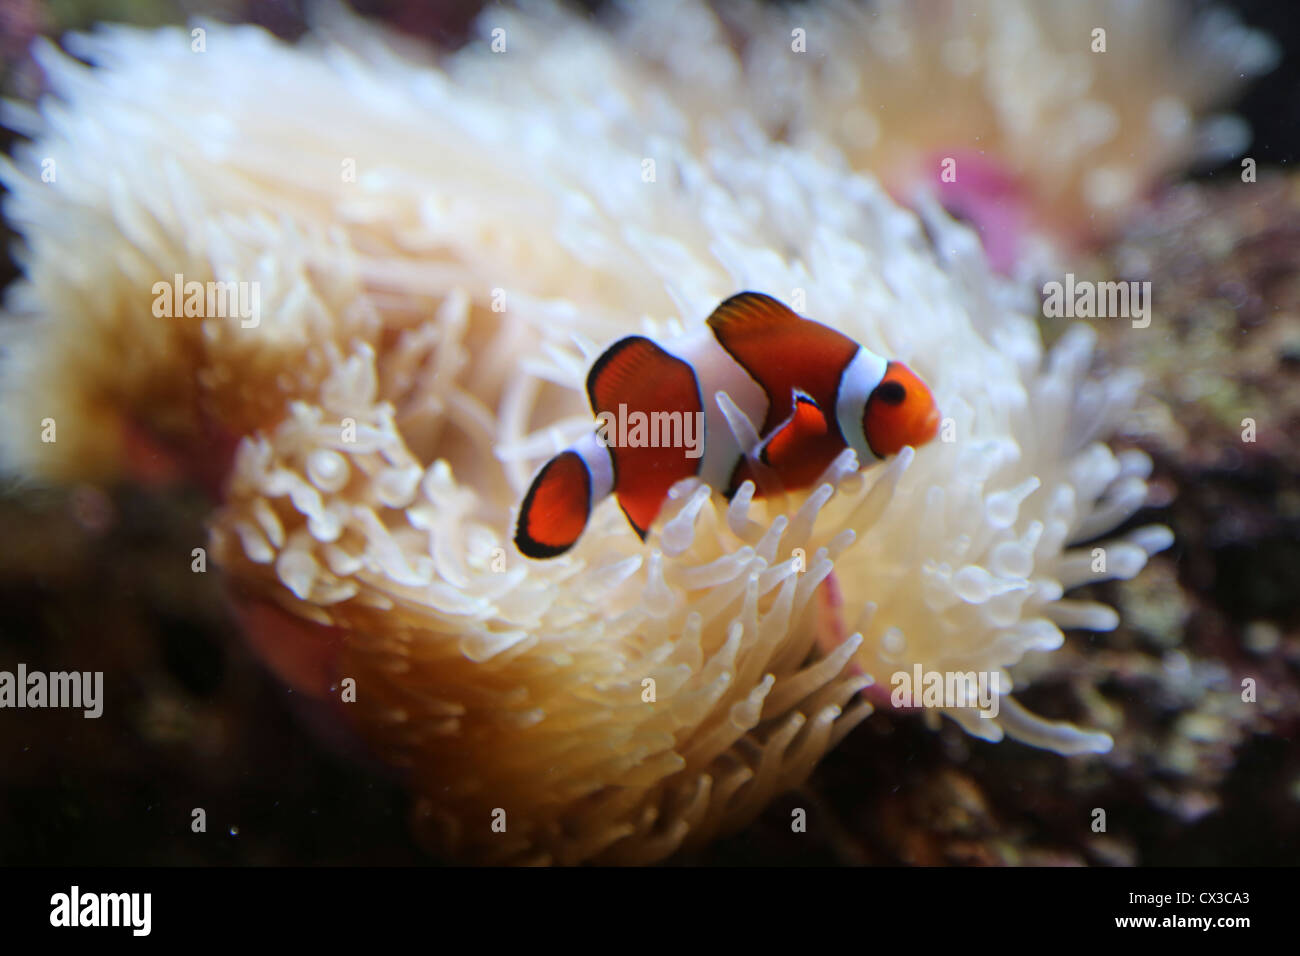 A Saltwater Aquarium Clownfish With Magnifica Anemone Stock Photo